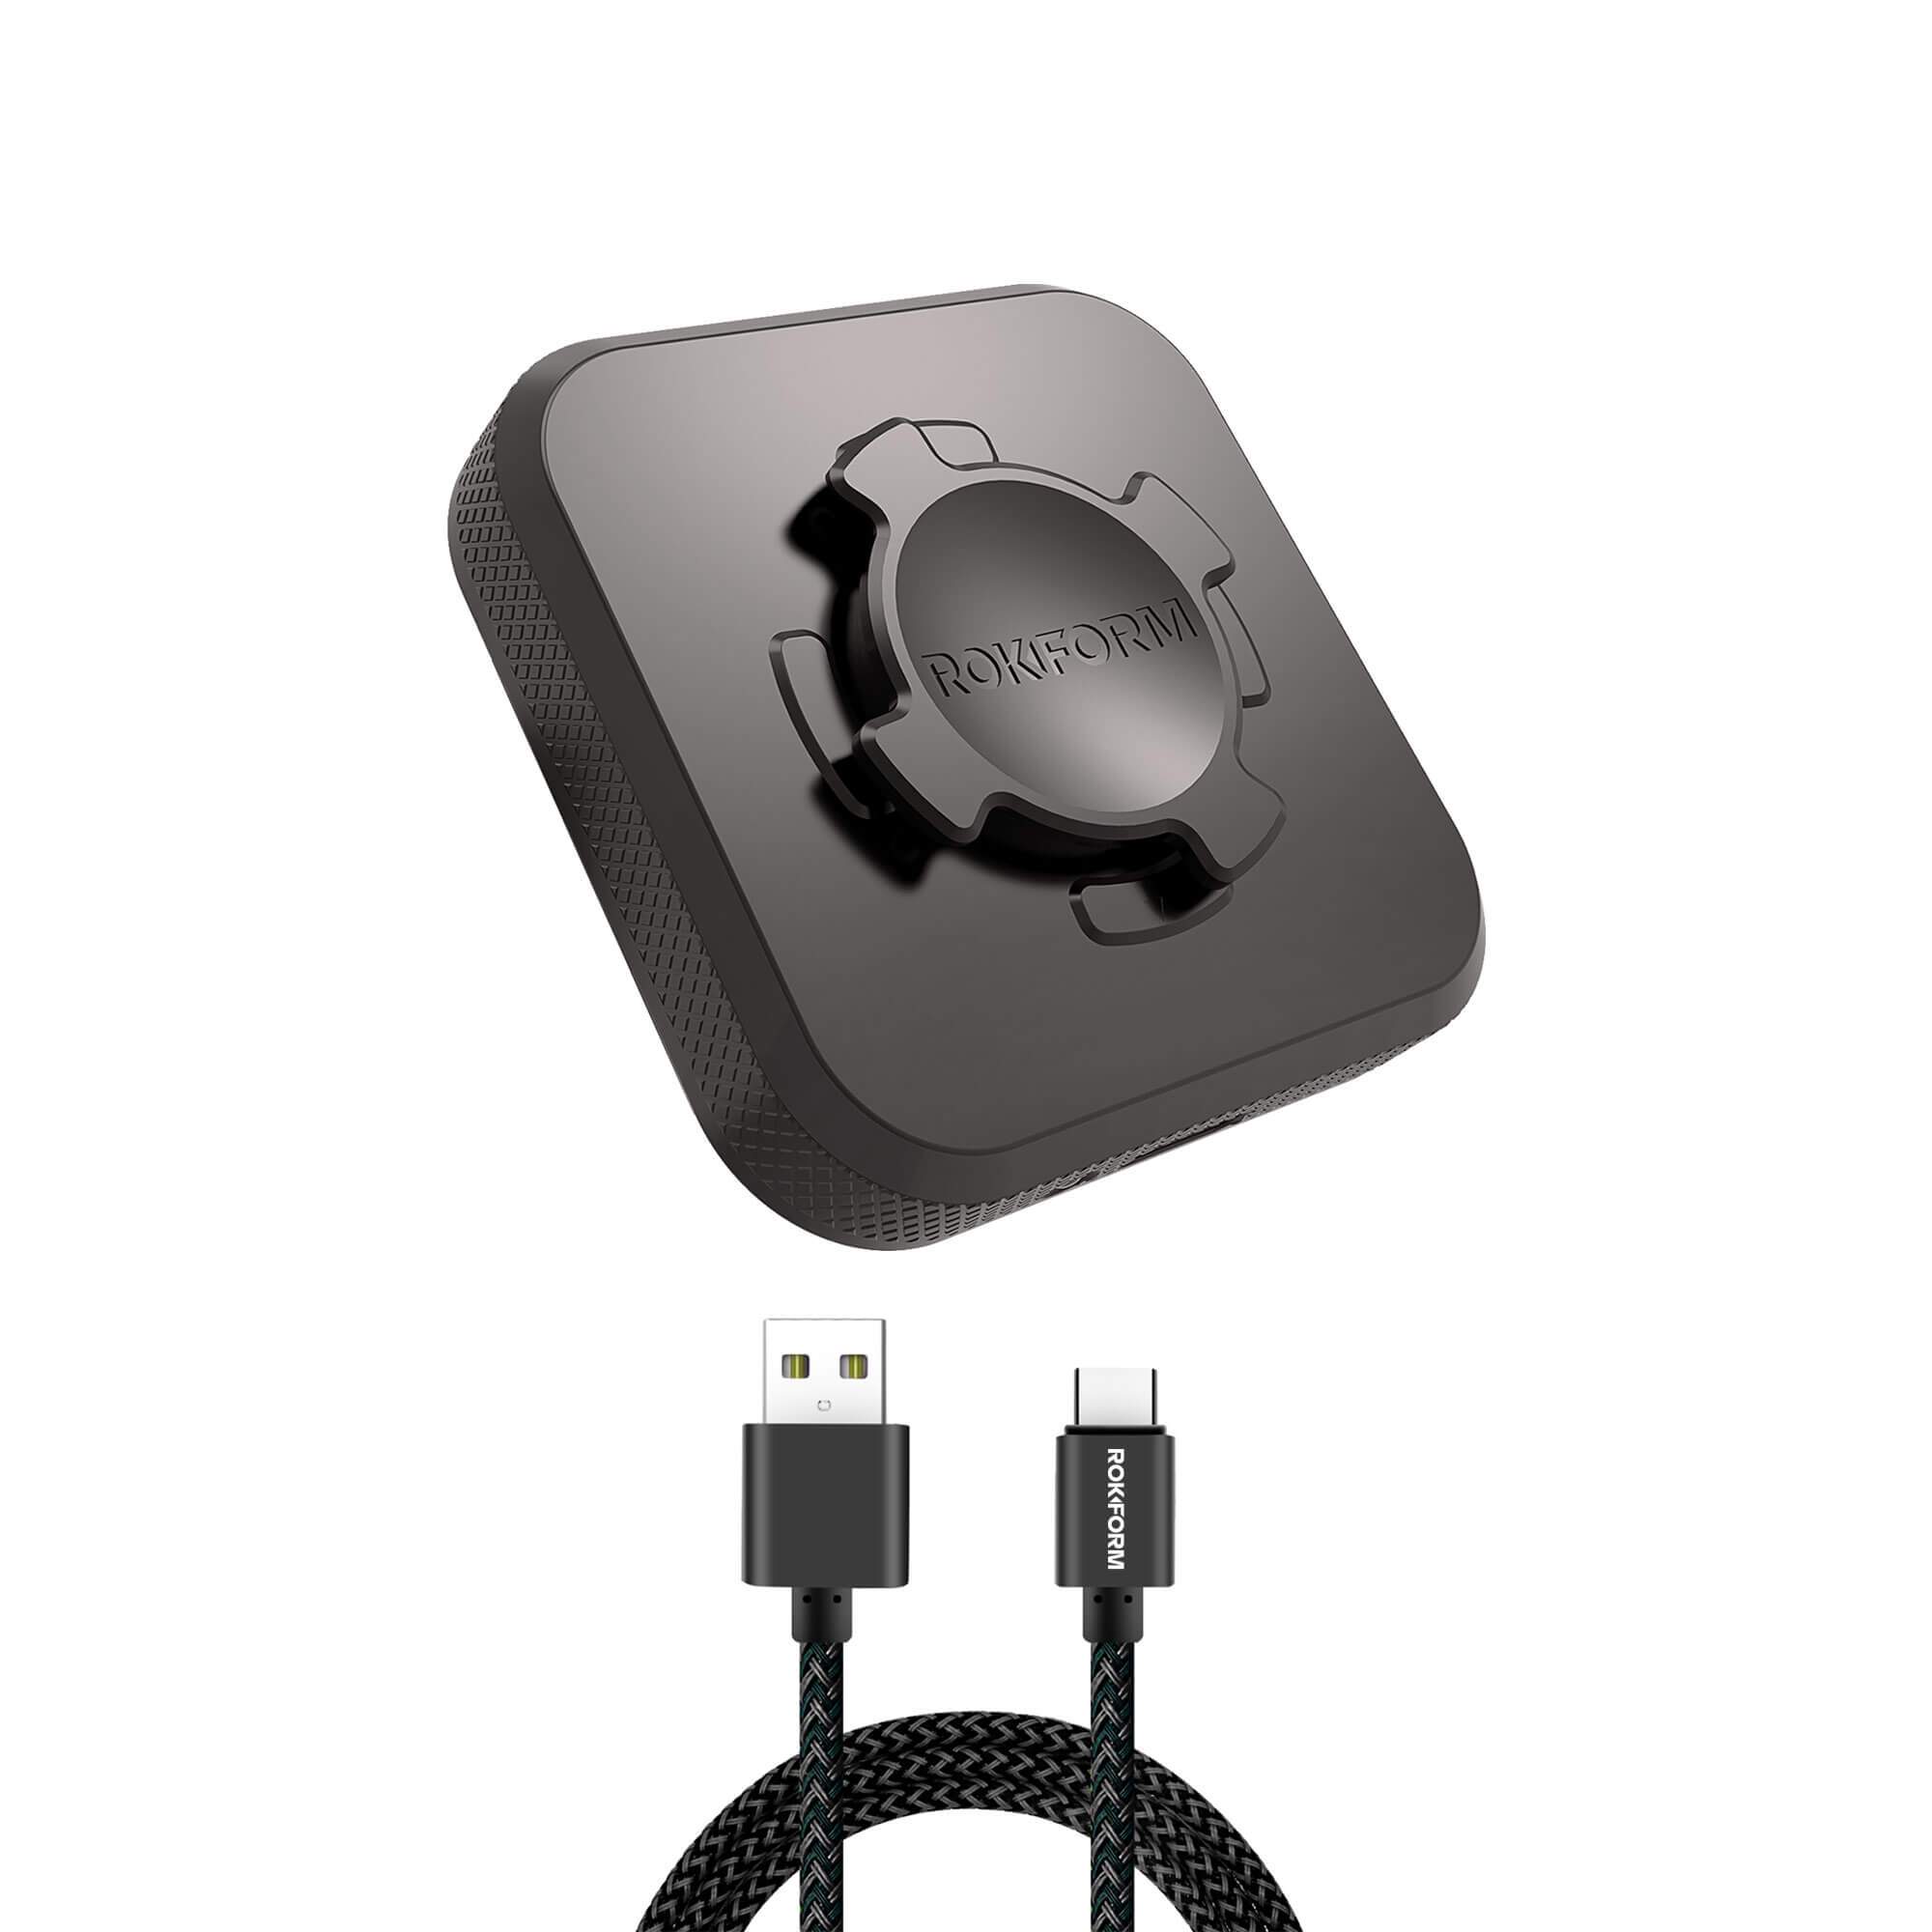 Quad Lock Motorcycle USB Charger - FREE UK DELIVERY